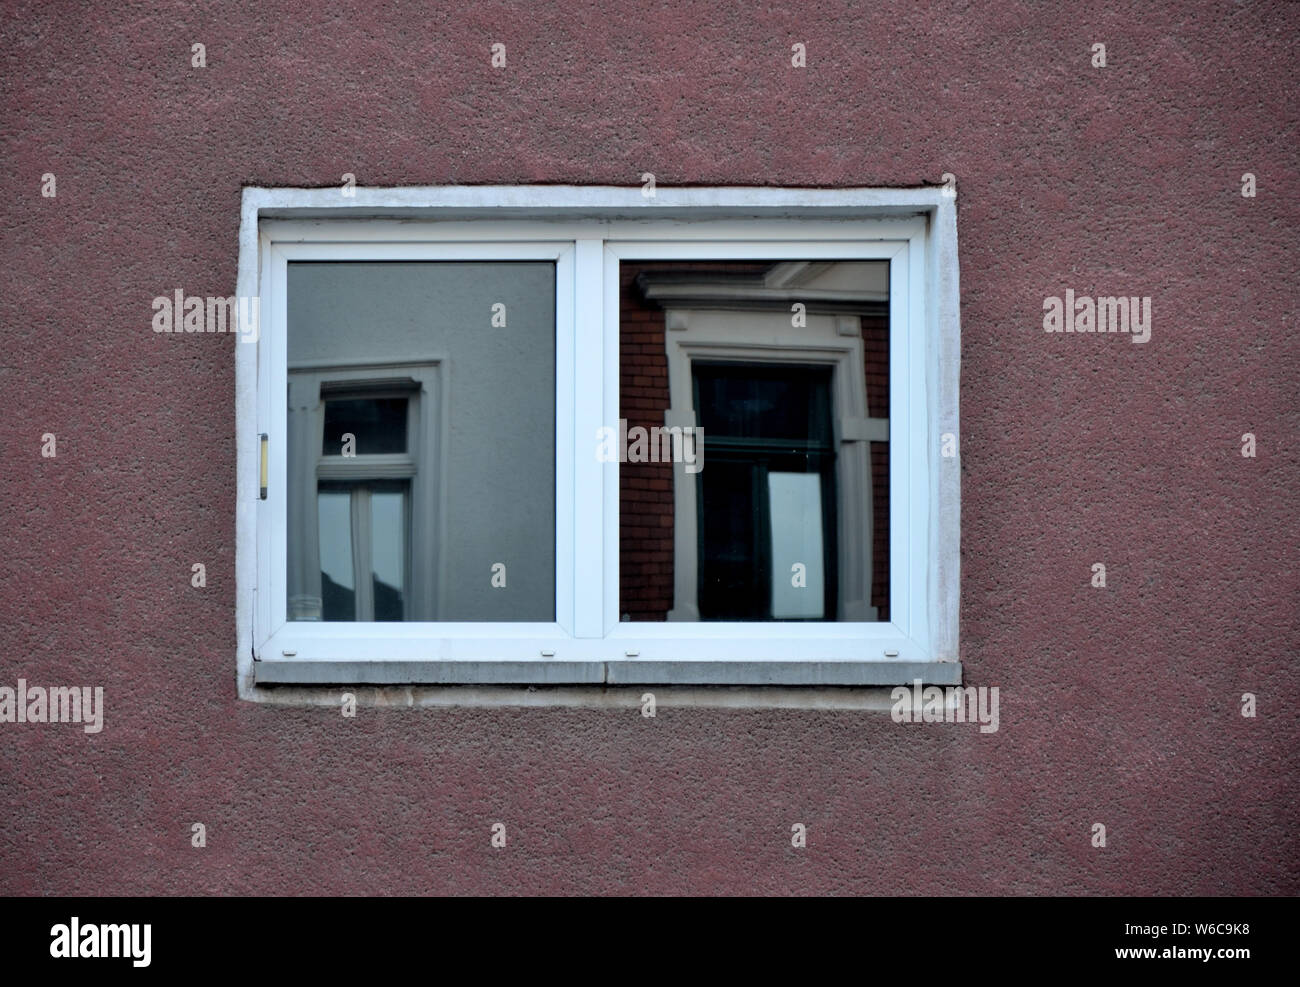 Window with reflection on an dark red wall Stock Photo